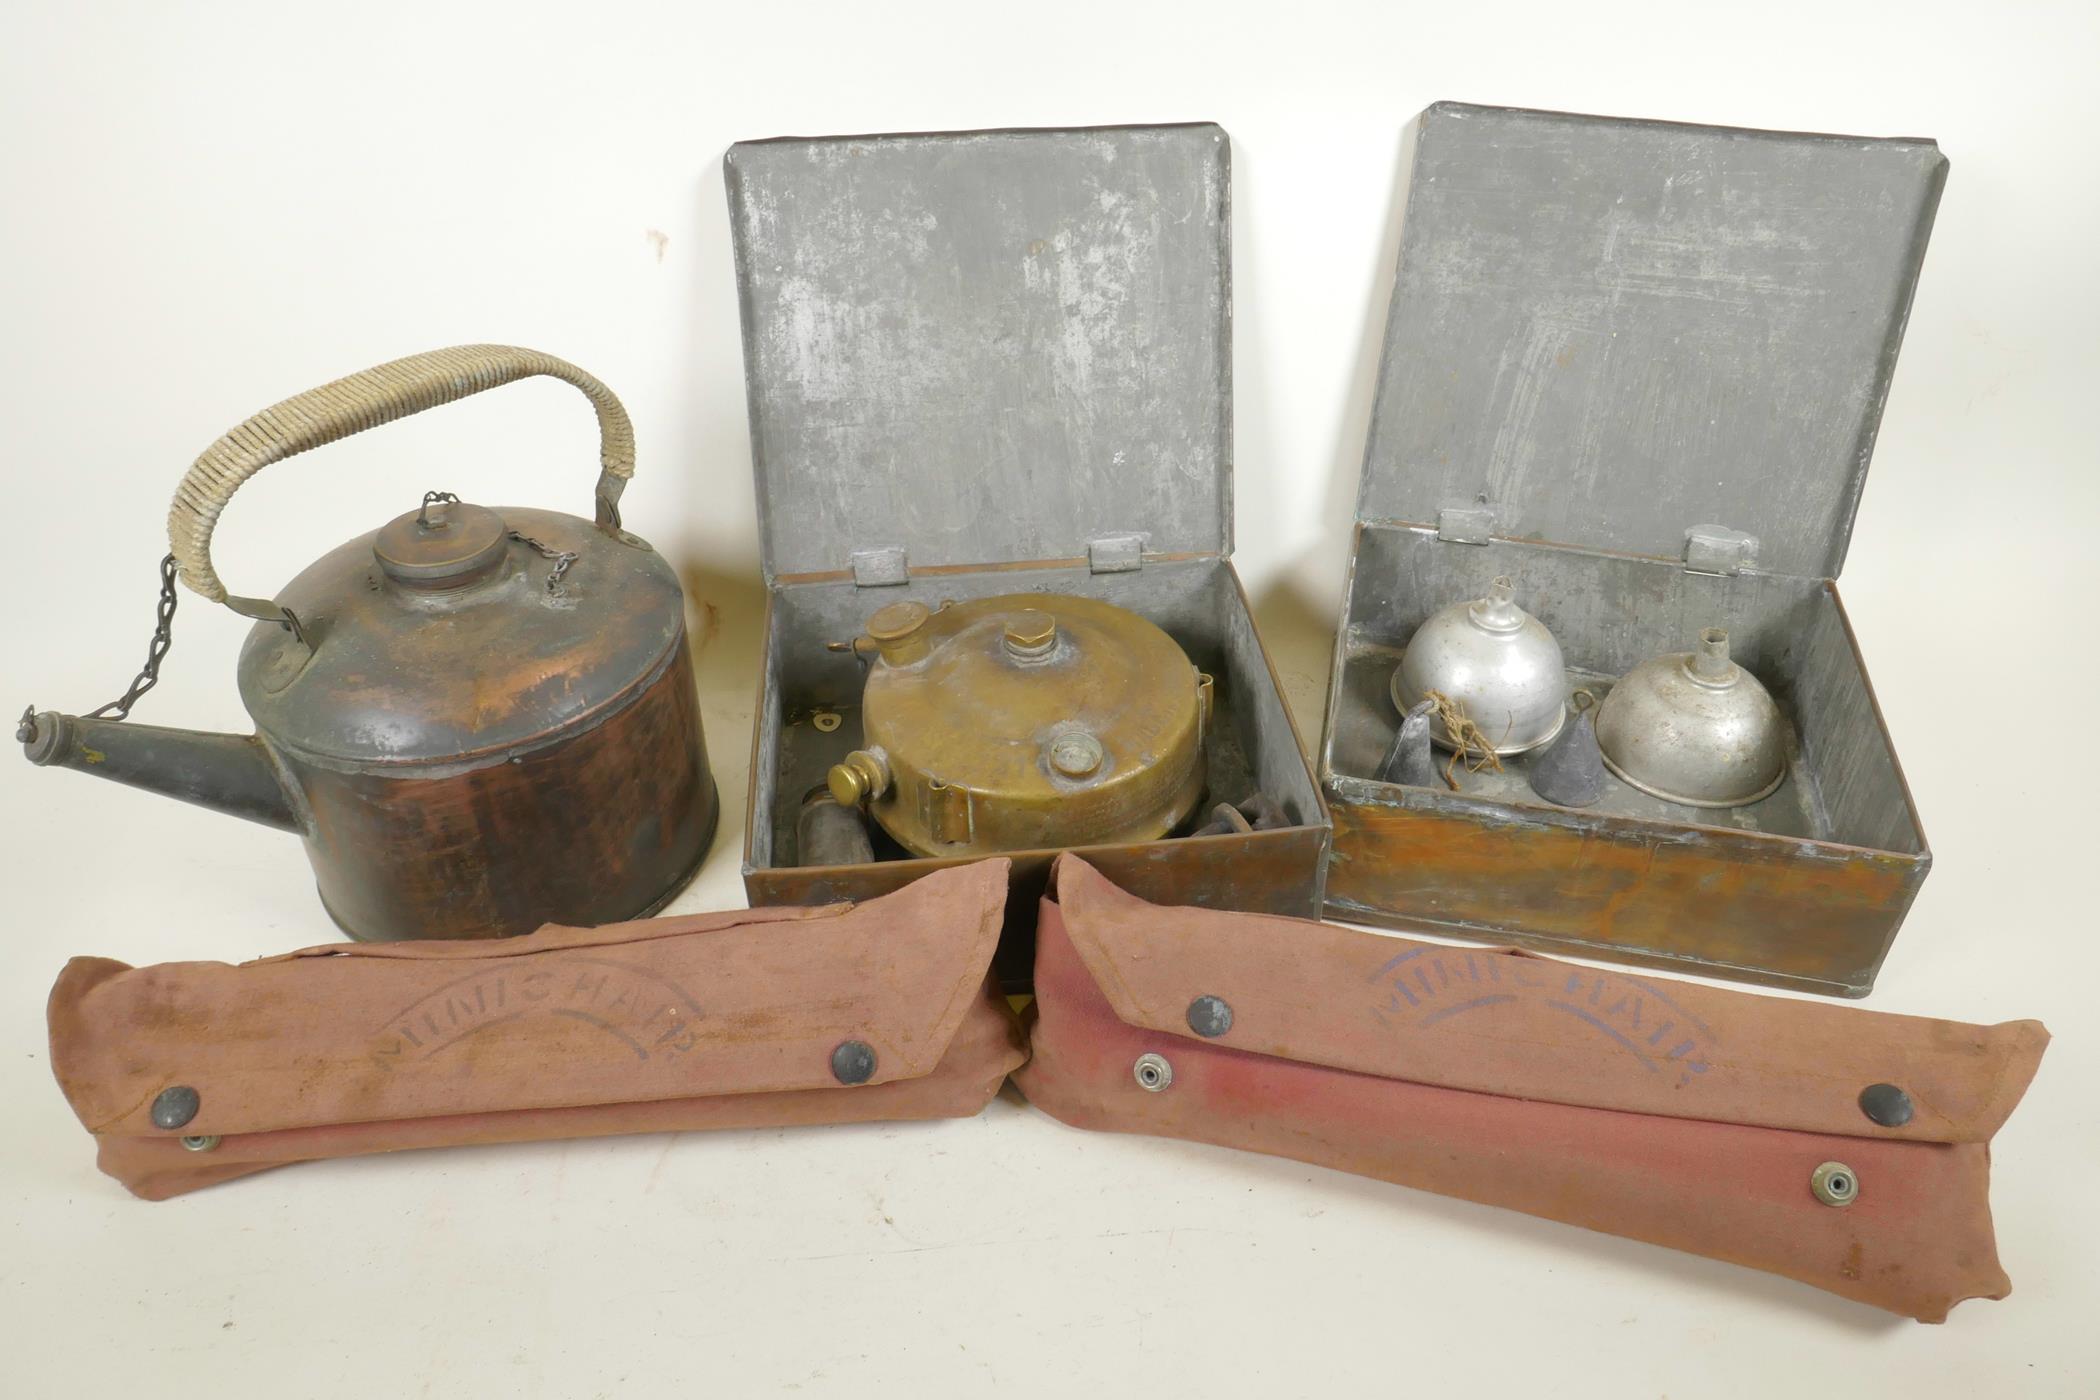 Vintage camping equipment including a boxed Primus no.221 brass stove (incomplete), two 'Mini Chair'